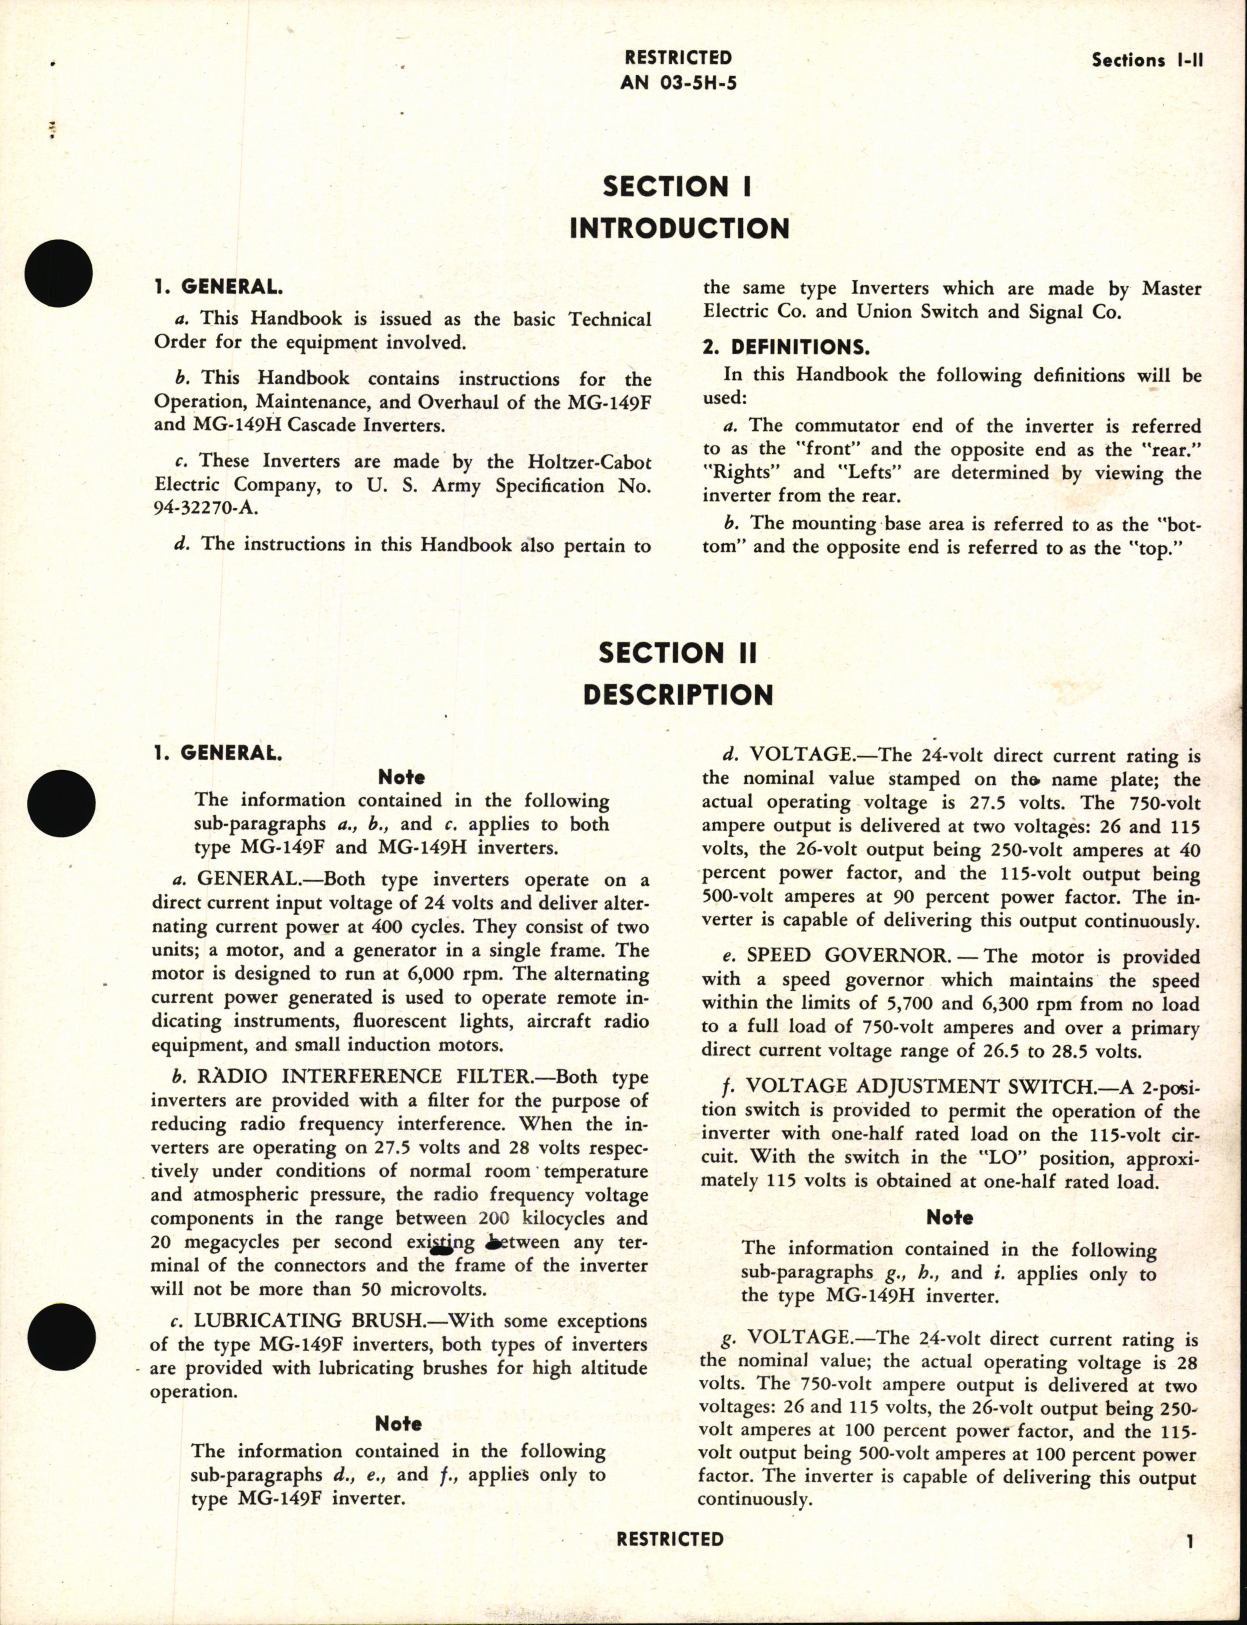 Sample page 5 from AirCorps Library document: Handbook of Instructions with Parts Catalog for Inverters, Types MG-149F and MG-149H